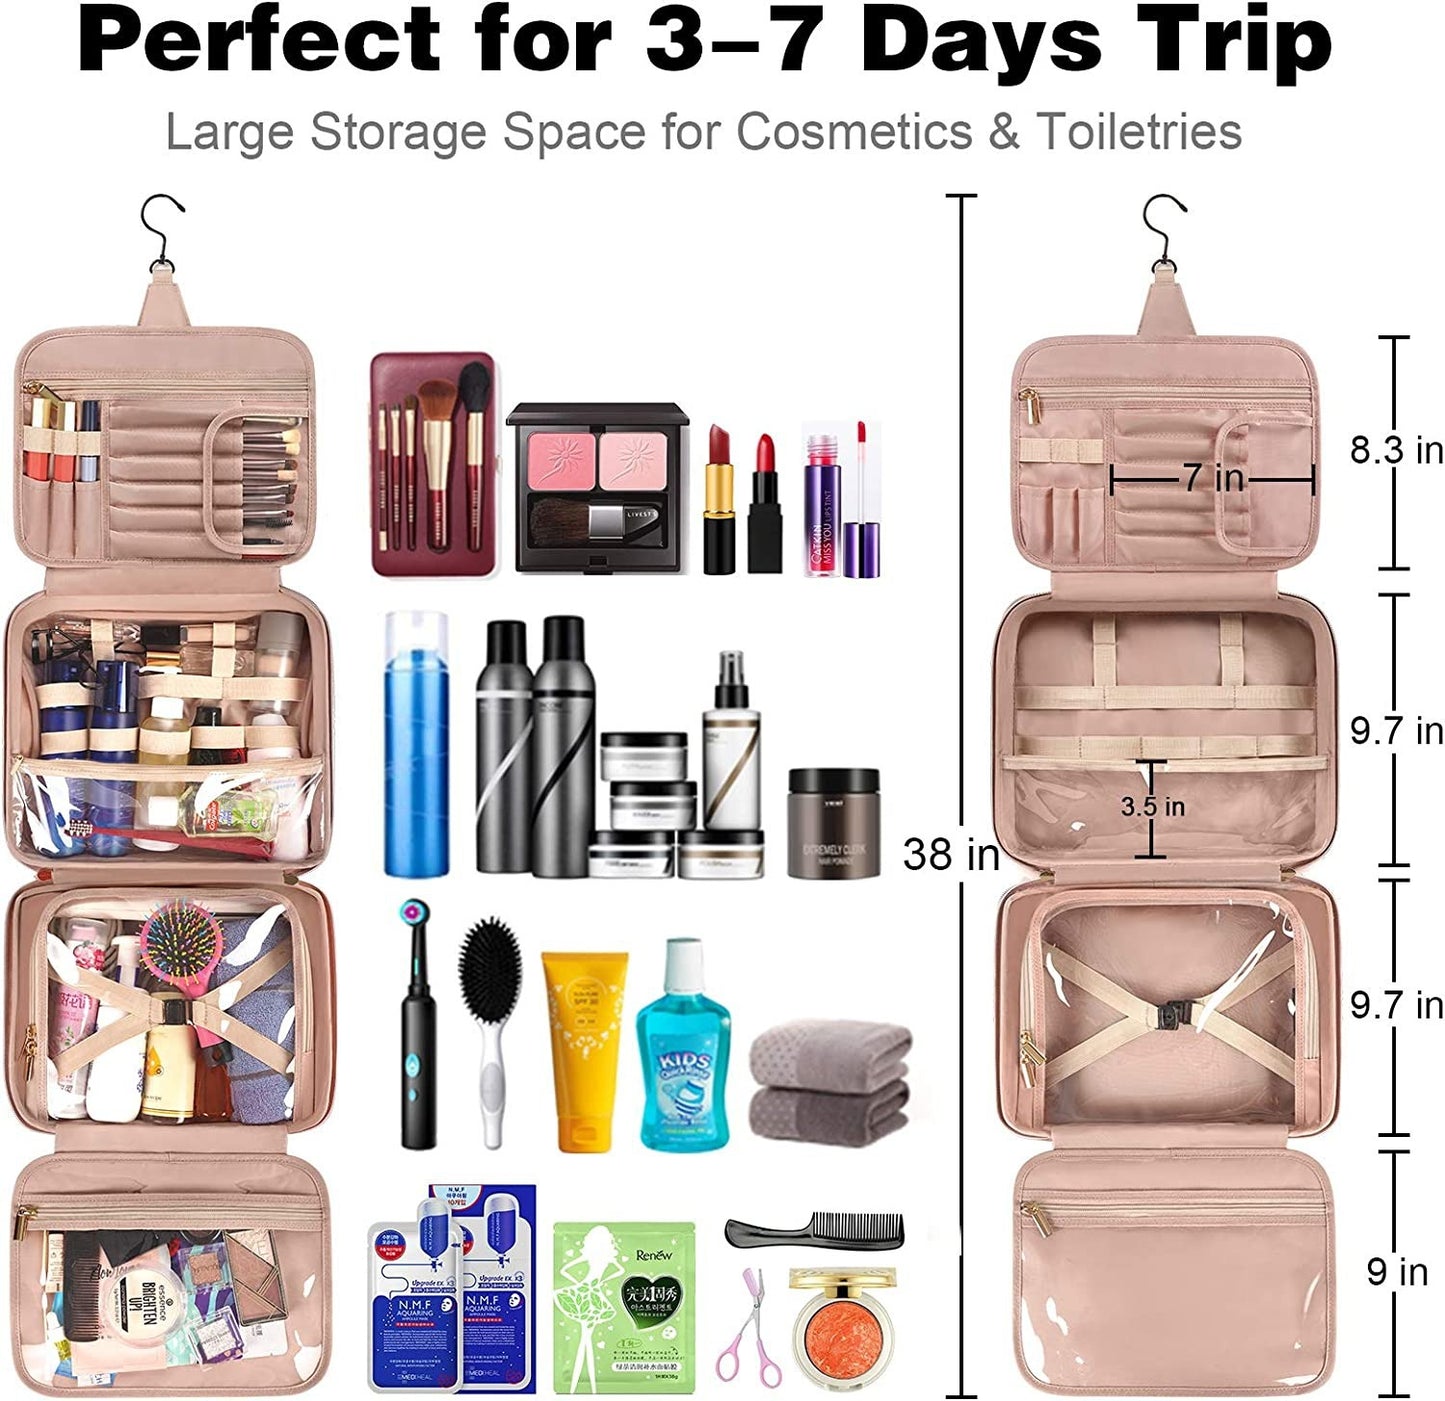 Water-resistant Toiletry Bag with hanging Hook For men and Women gift, Foldable Makeup Cosmetic Bag Travel Organizer for Accessories, Shampoo, Full Sized Container, Toiletries